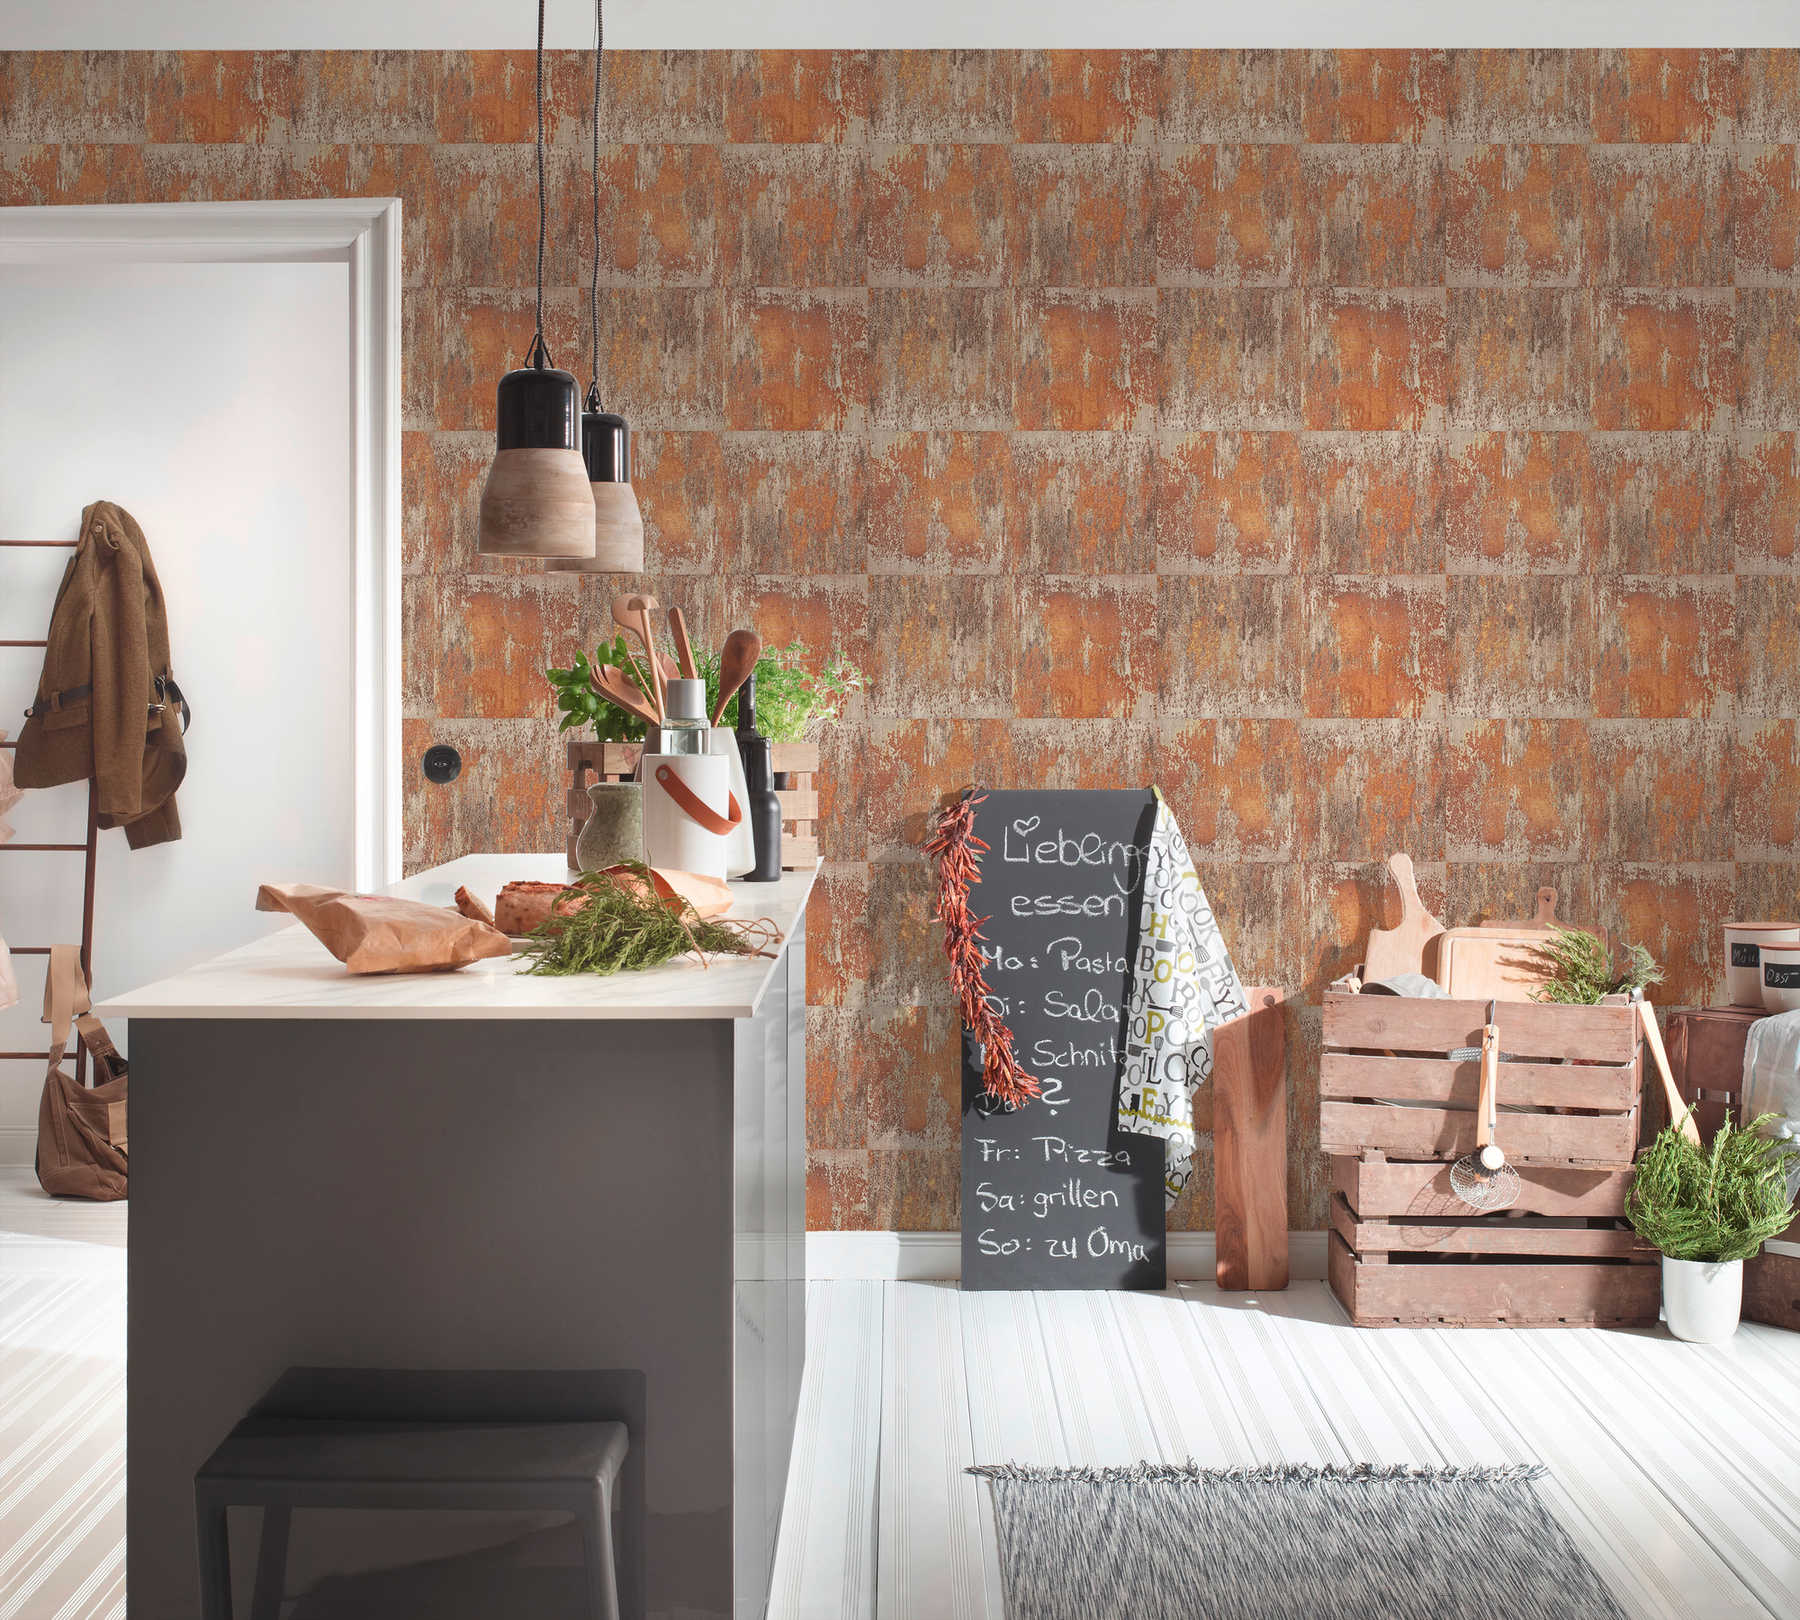             Non-woven wallpaper patina design with rust and copper effects - orange, brown, copper
        